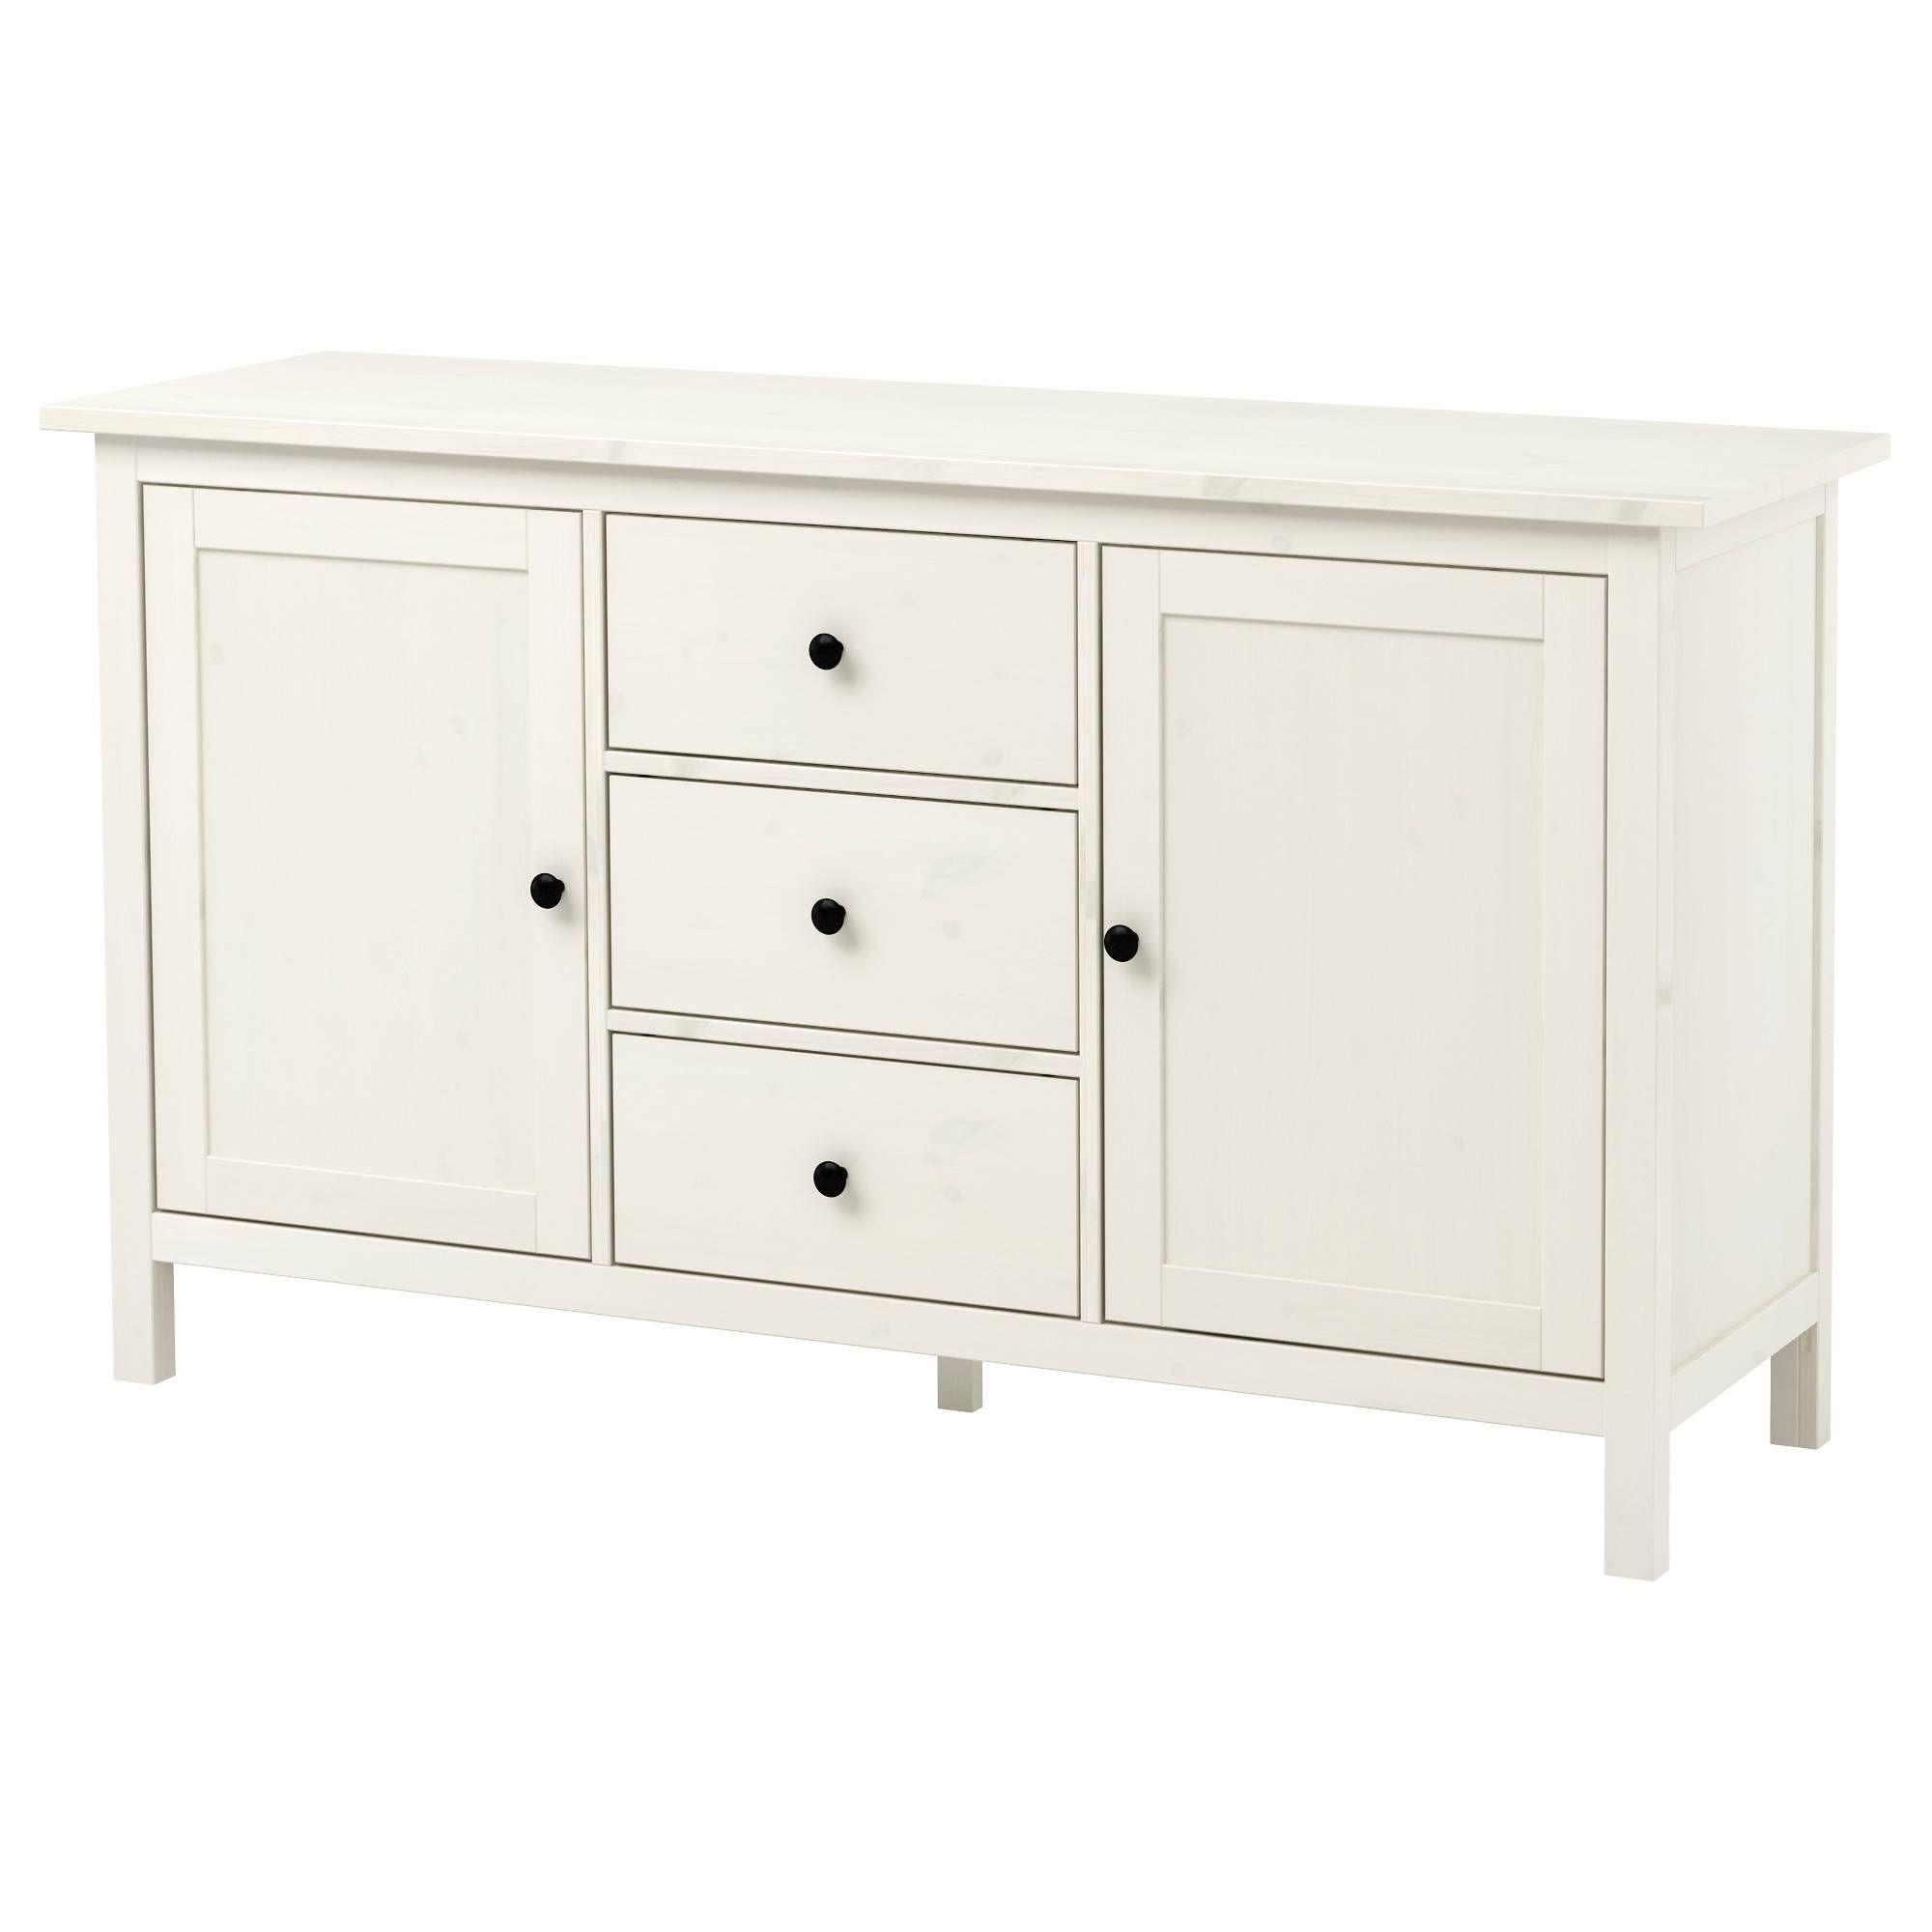 Hemnes Sideboard White Stain 157x88 Cm – Ikea For White Gloss Ikea Sideboards (Photo 5 of 15)